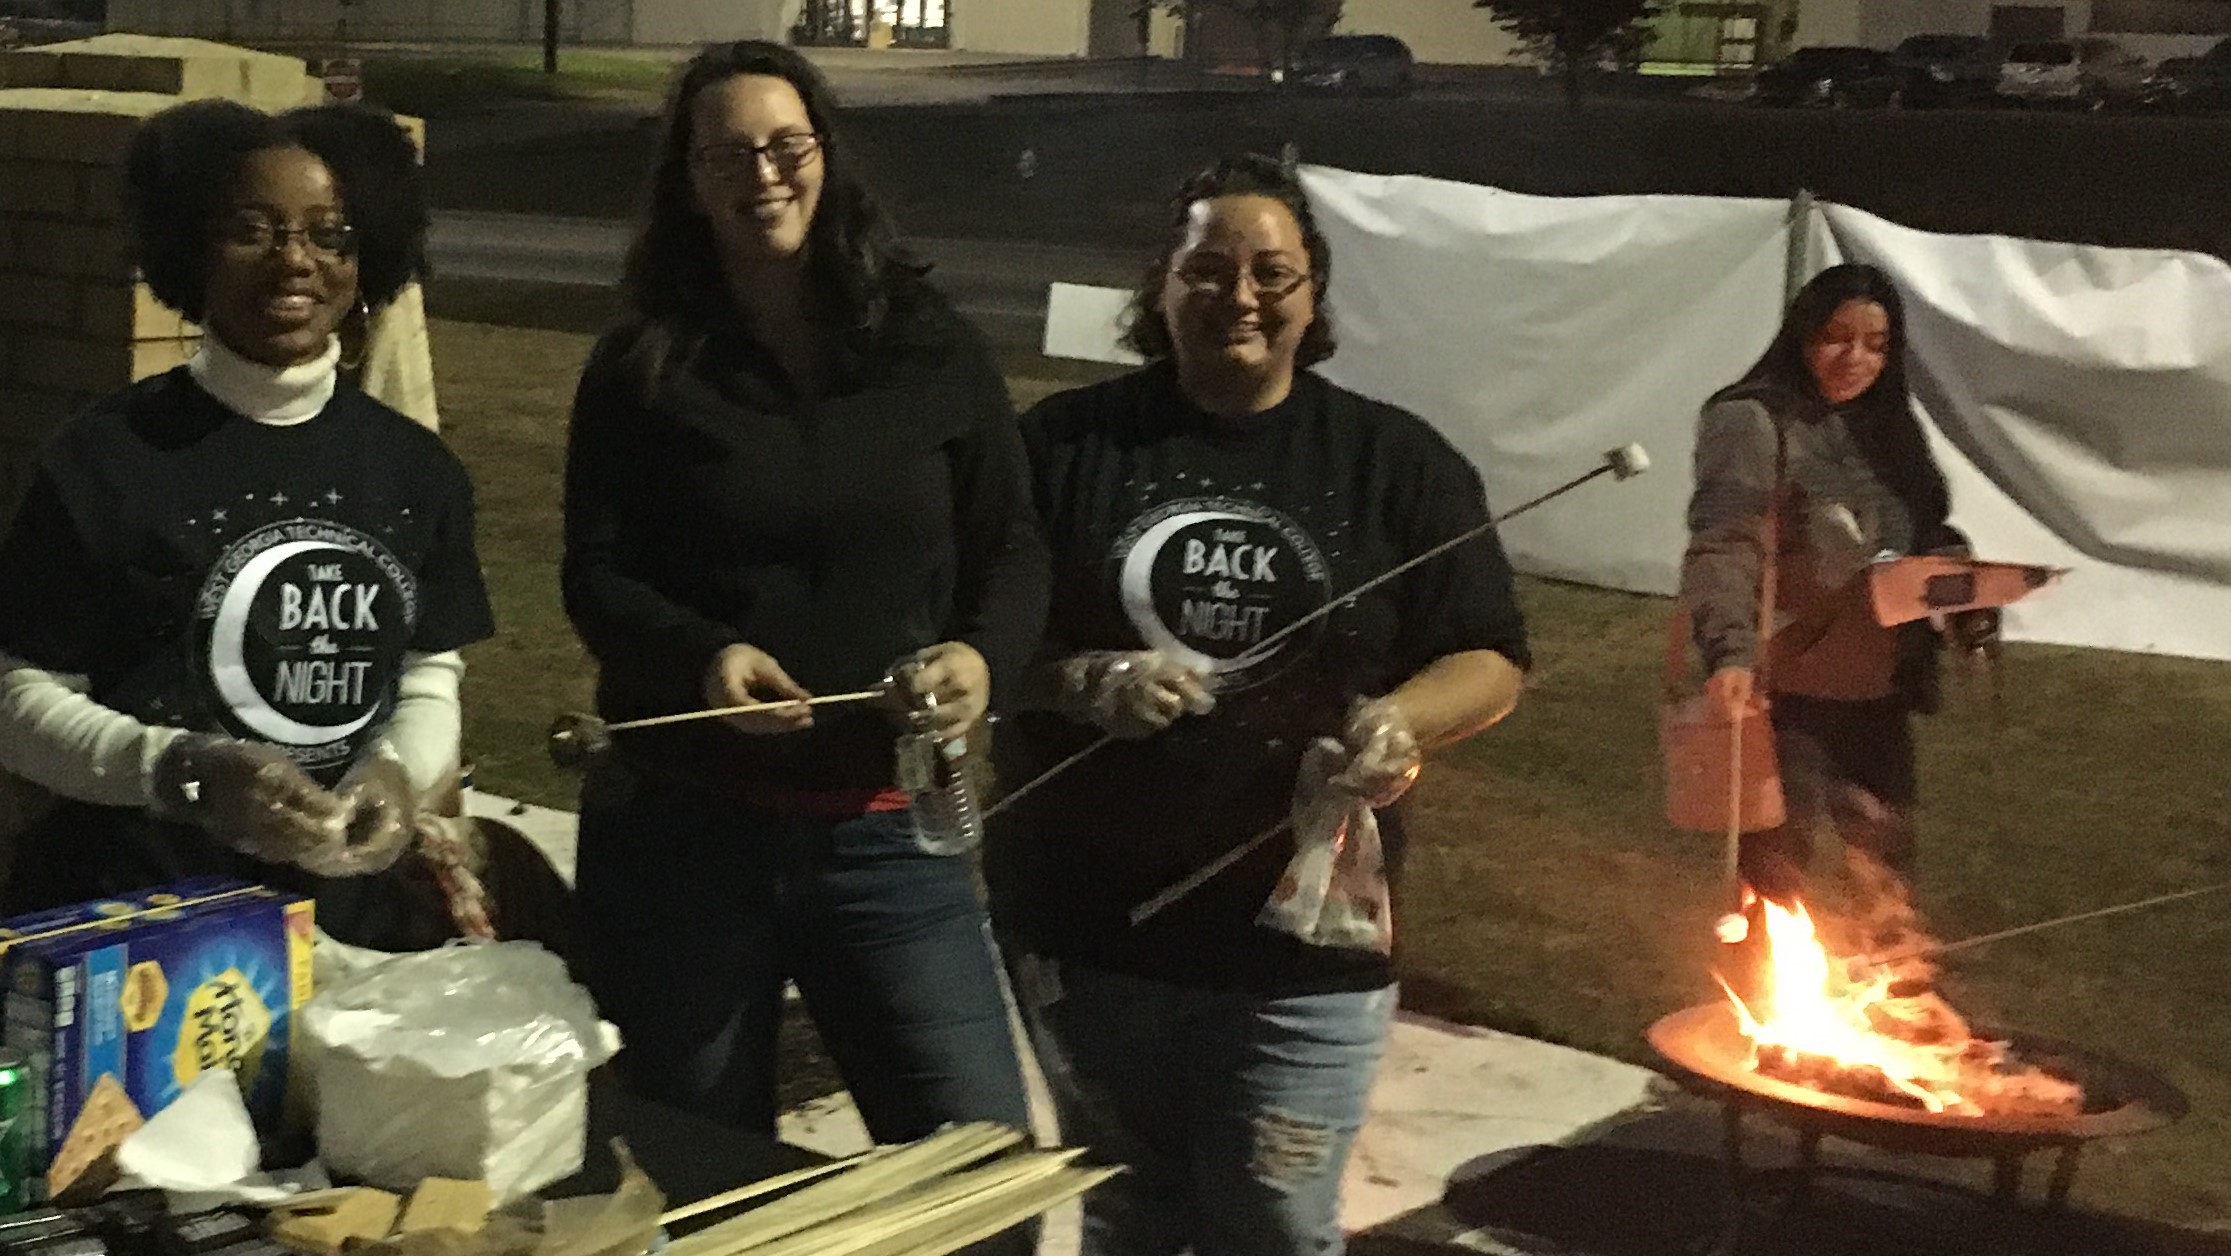 Members of PBL and SkillsUSA at WGTC's 'Take Back the Night'